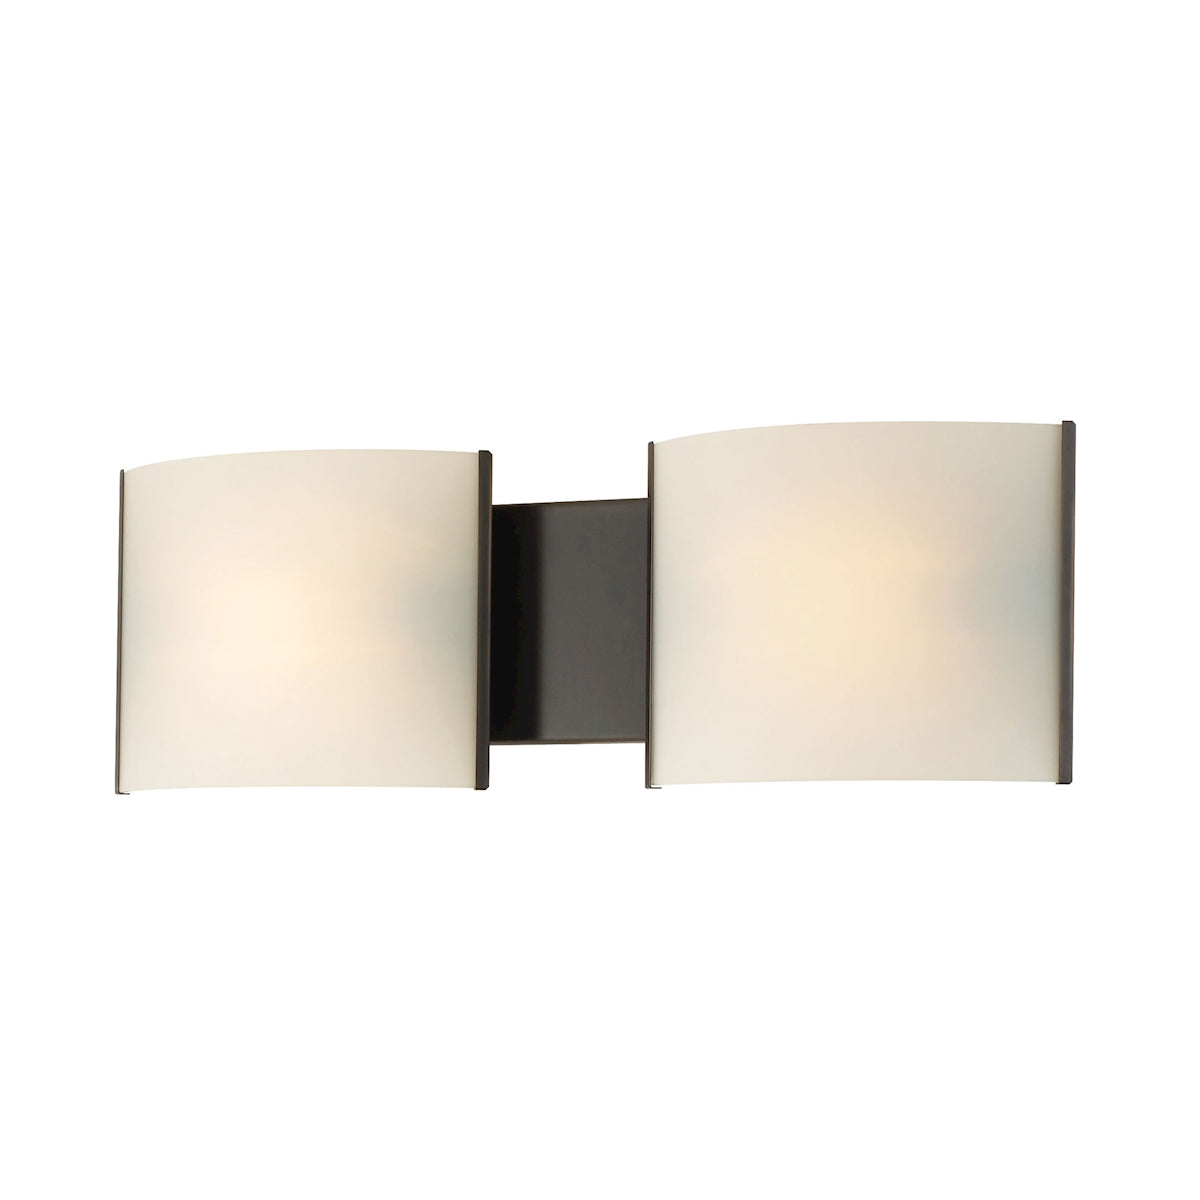 ELK Lighting BV712-10-45 Pannelli 2-Light Vanity Sconce in Oil Rubbed Bronze with Hand-formed White Opal Glass